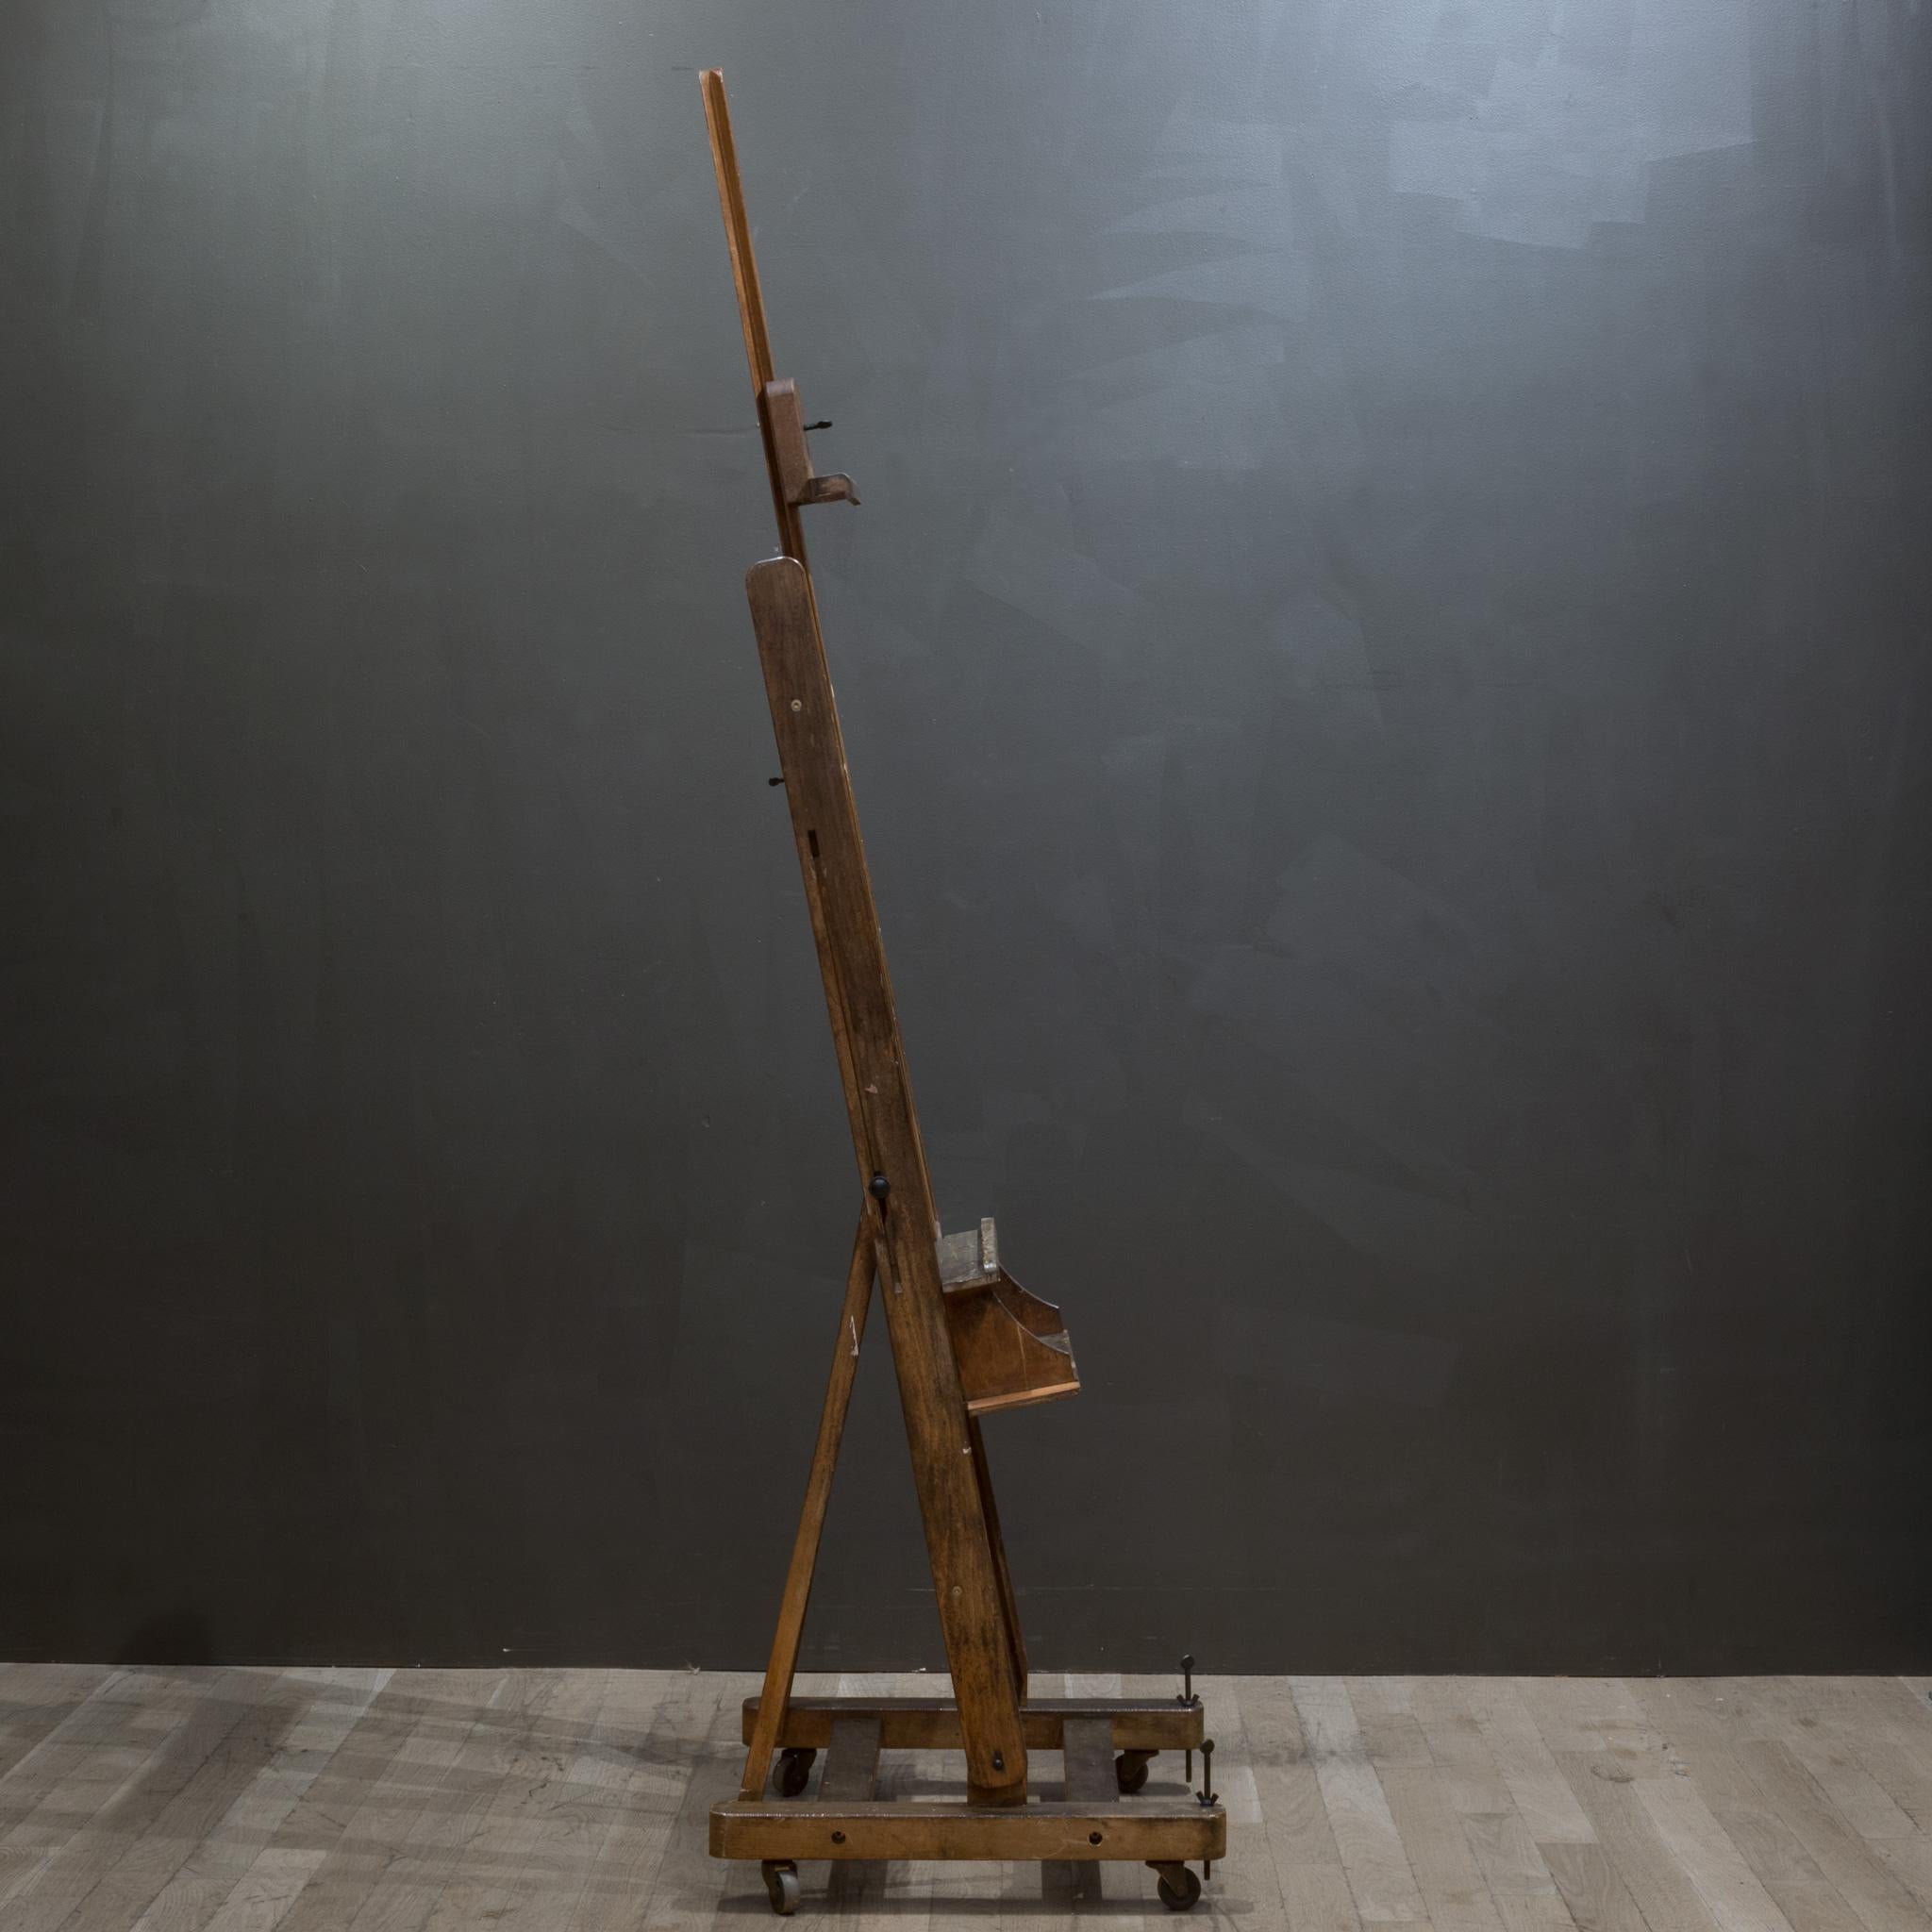 Wood Early-Mid 20th c. Collapsible Artist's Easel c.1940-1950